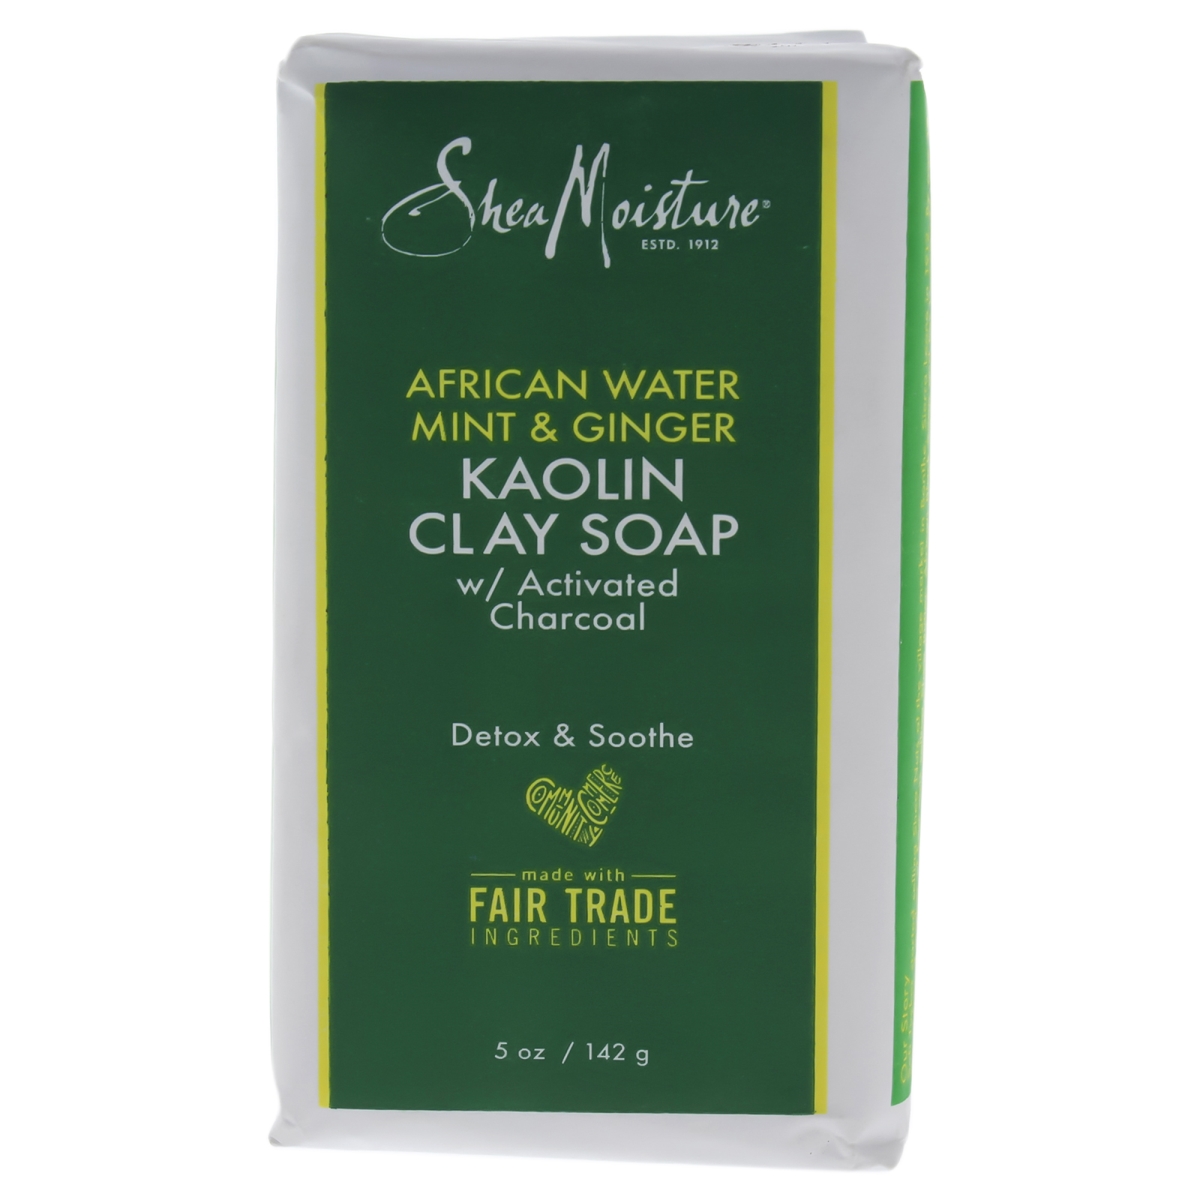 I0084282 African Water Mint & Ginger Kaolin Clay Bar Soap For Unisex - 5 Oz